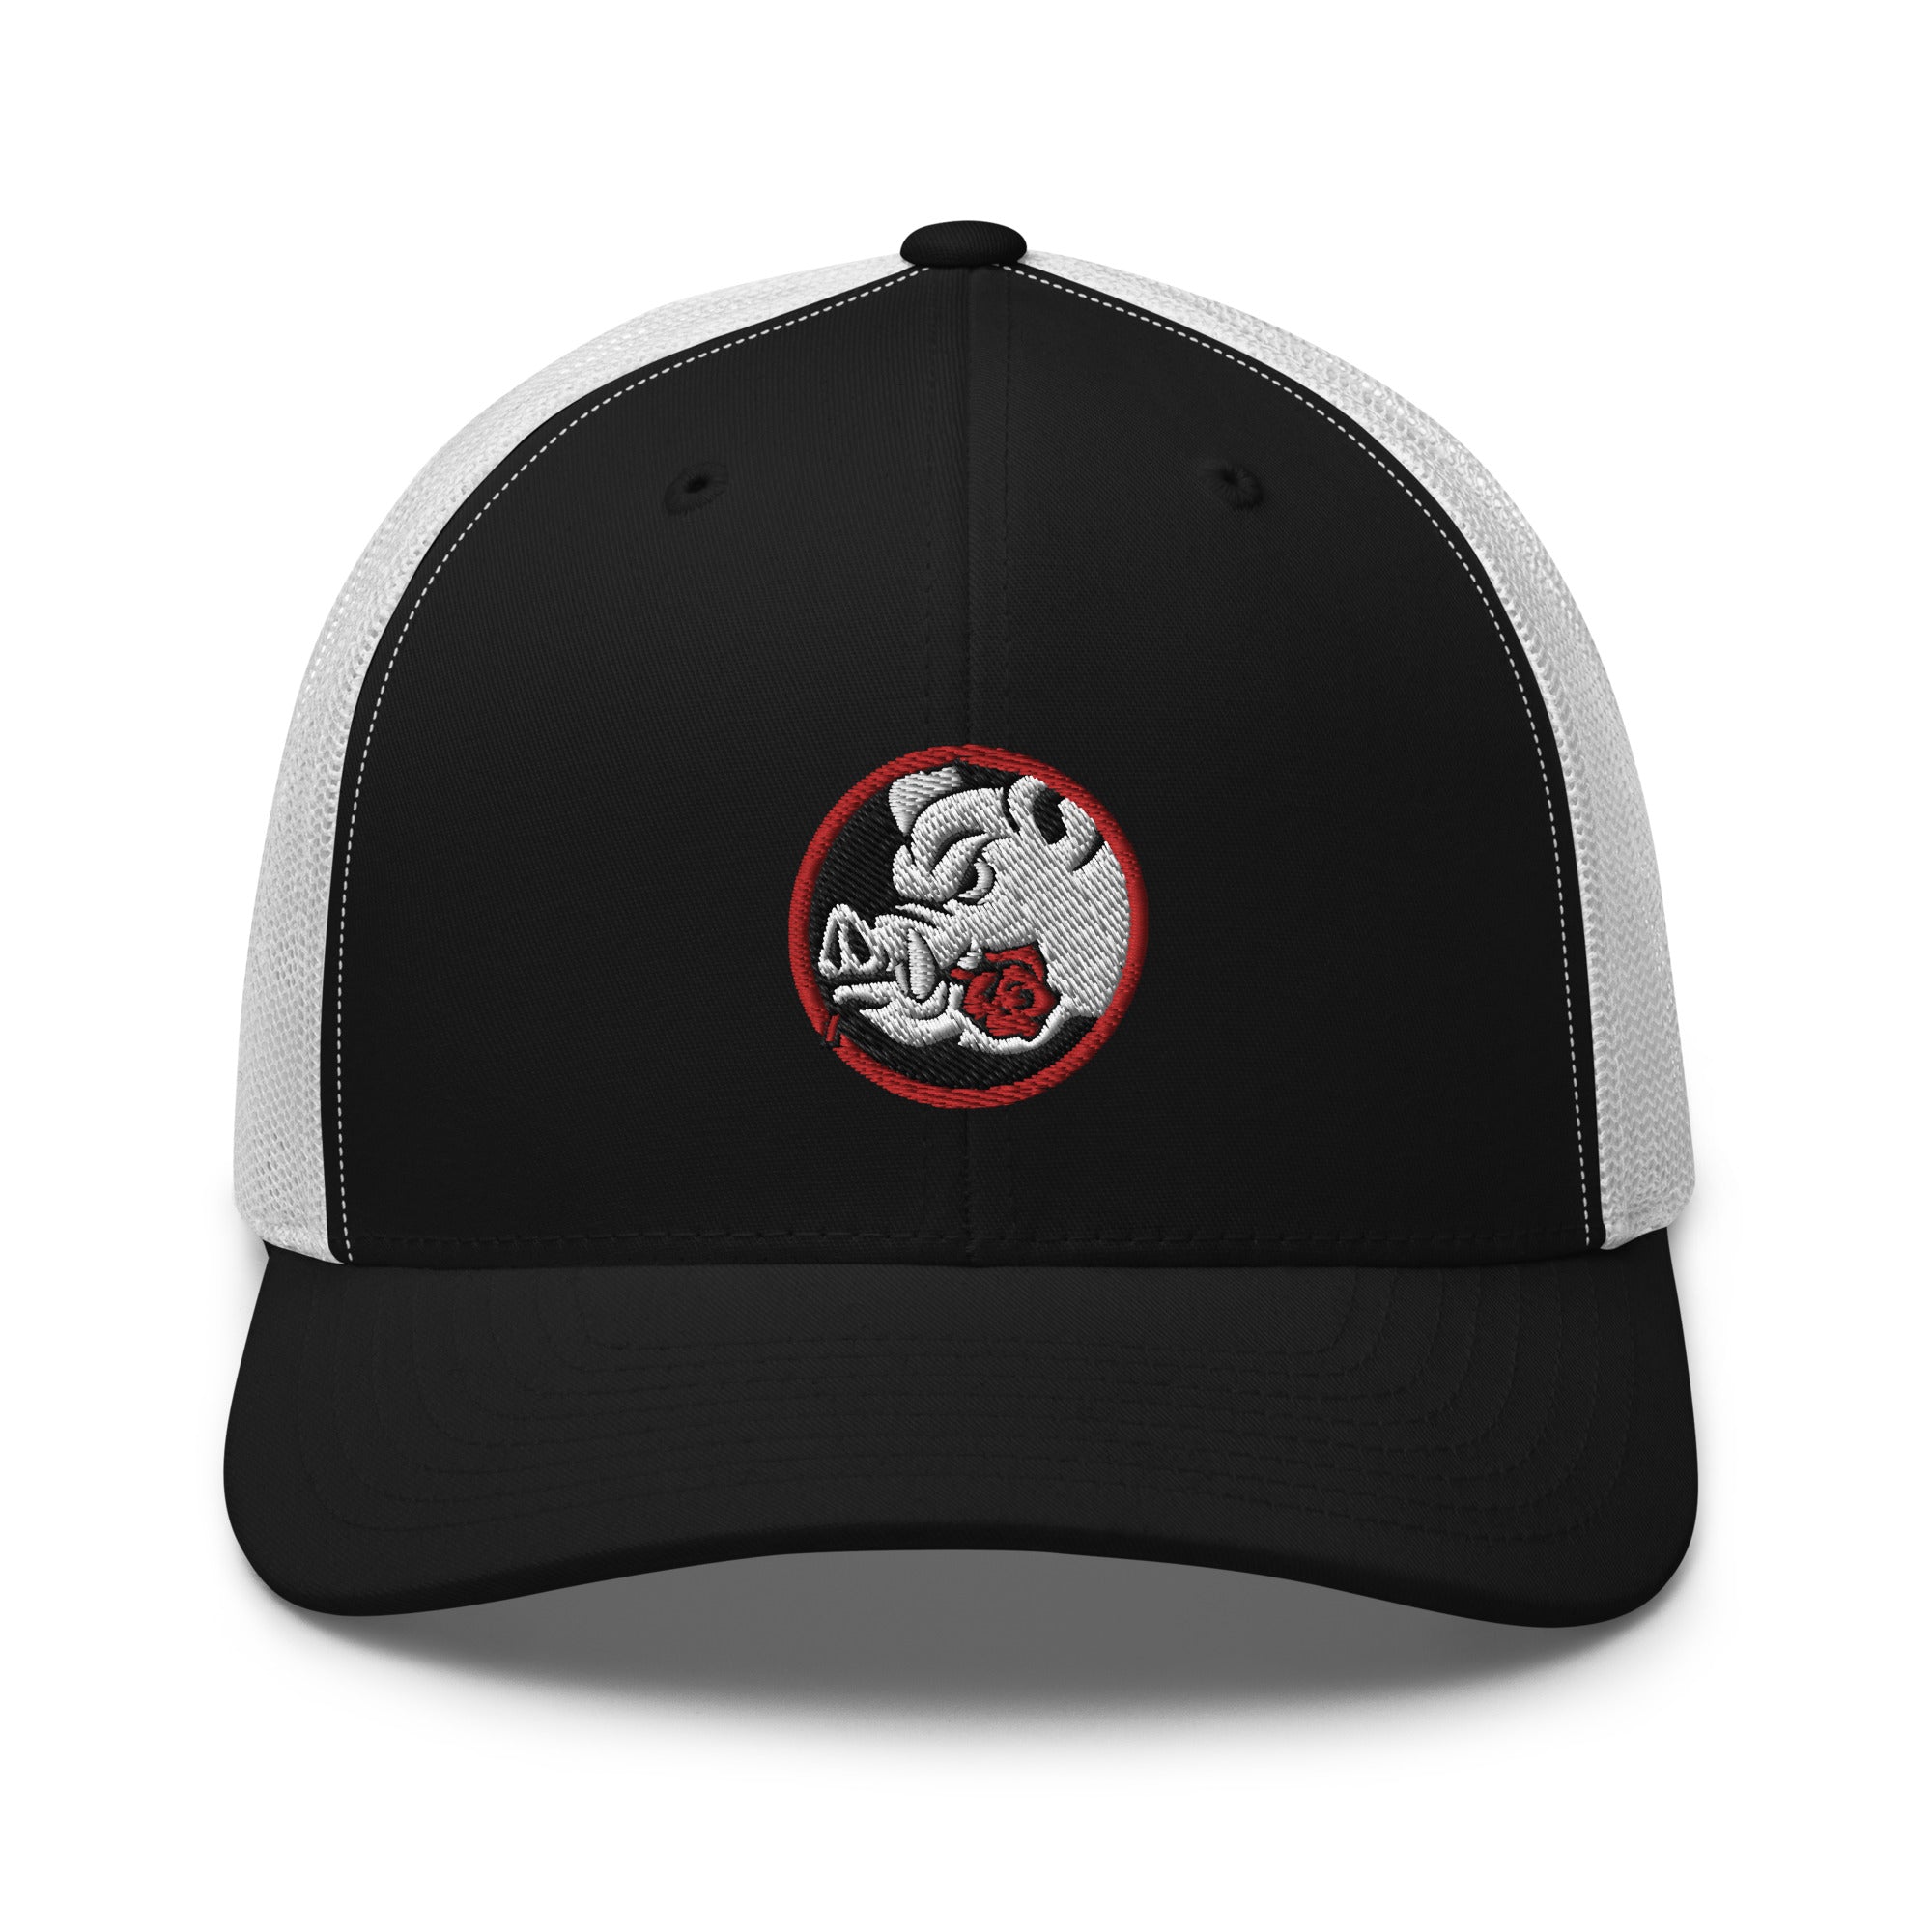 Rugby Imports Portland Pigs Trucker Cap